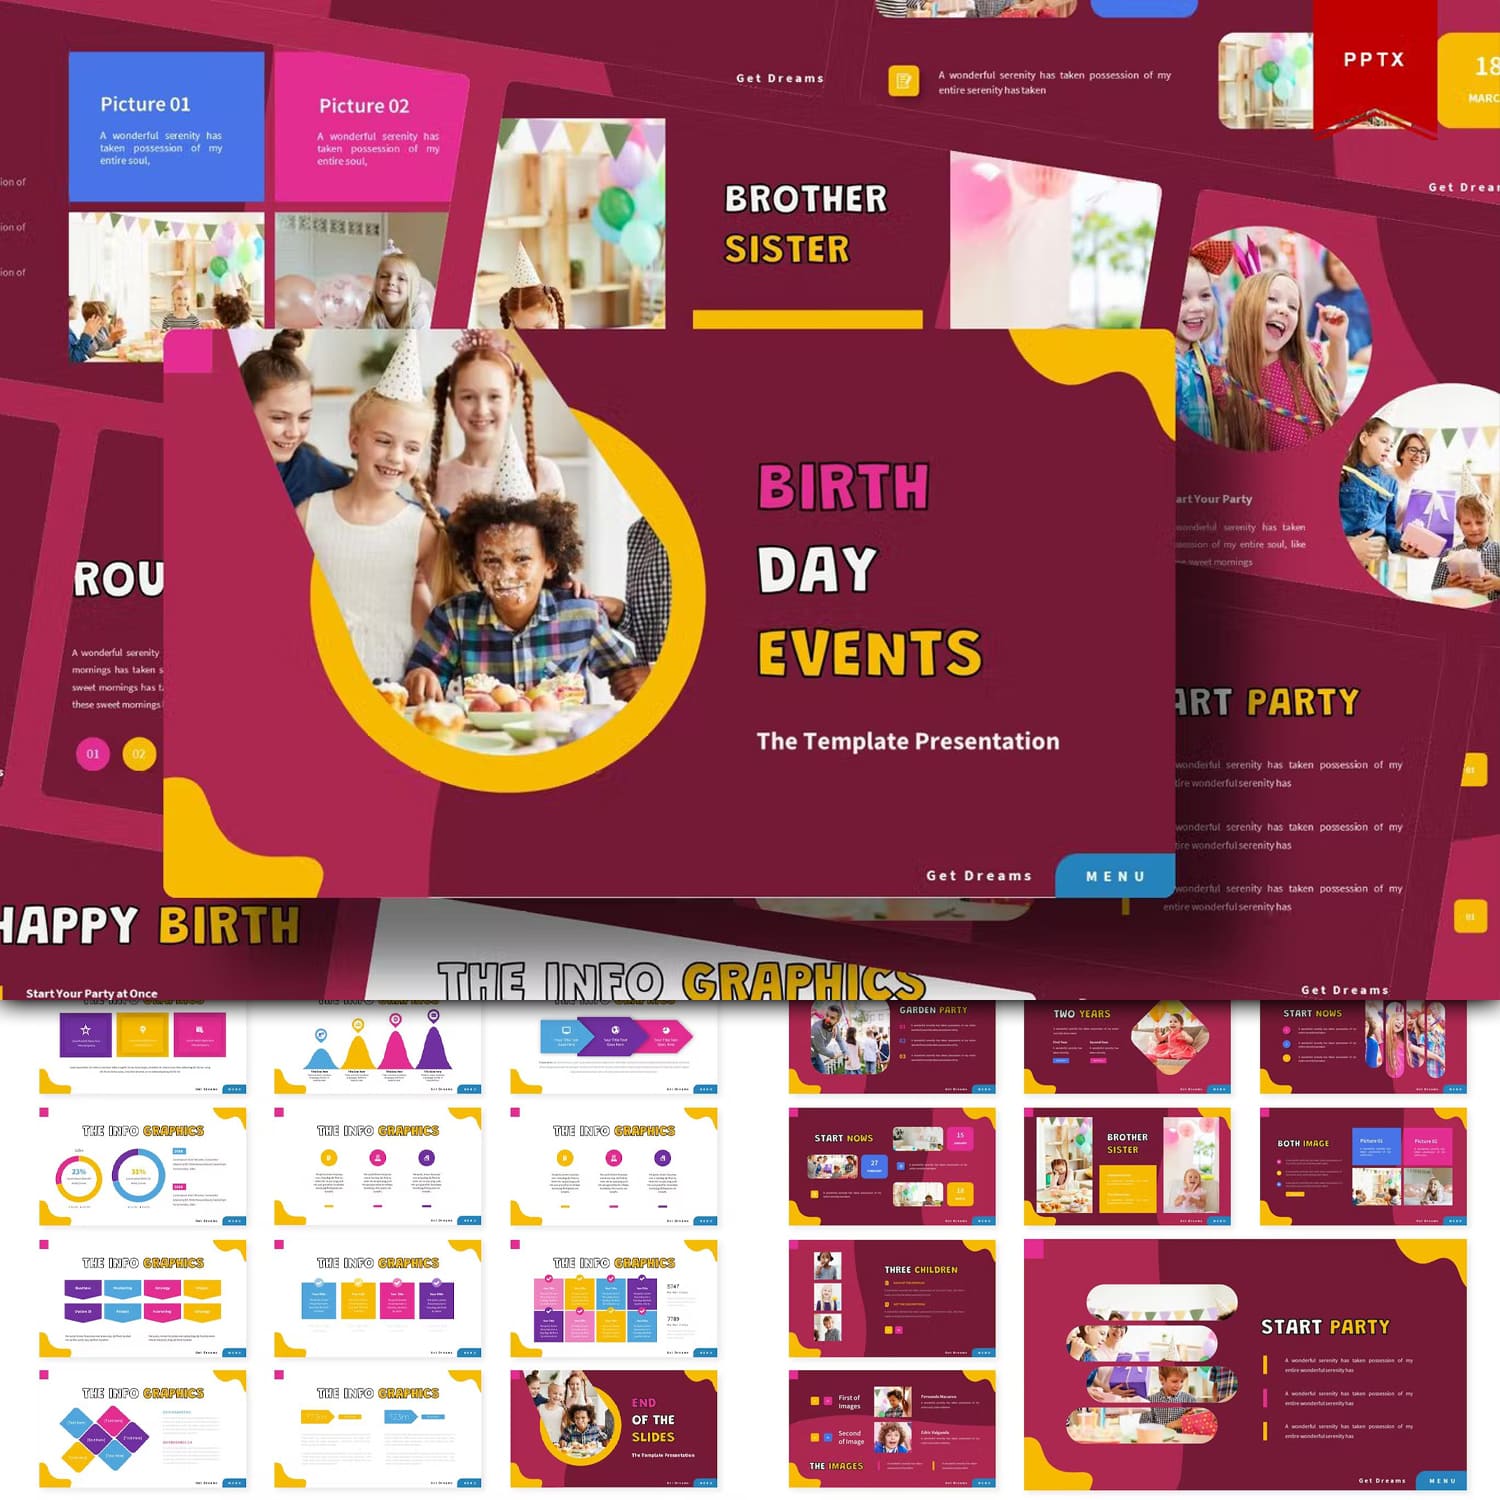 Birth day events powerpoint template - main image preview.